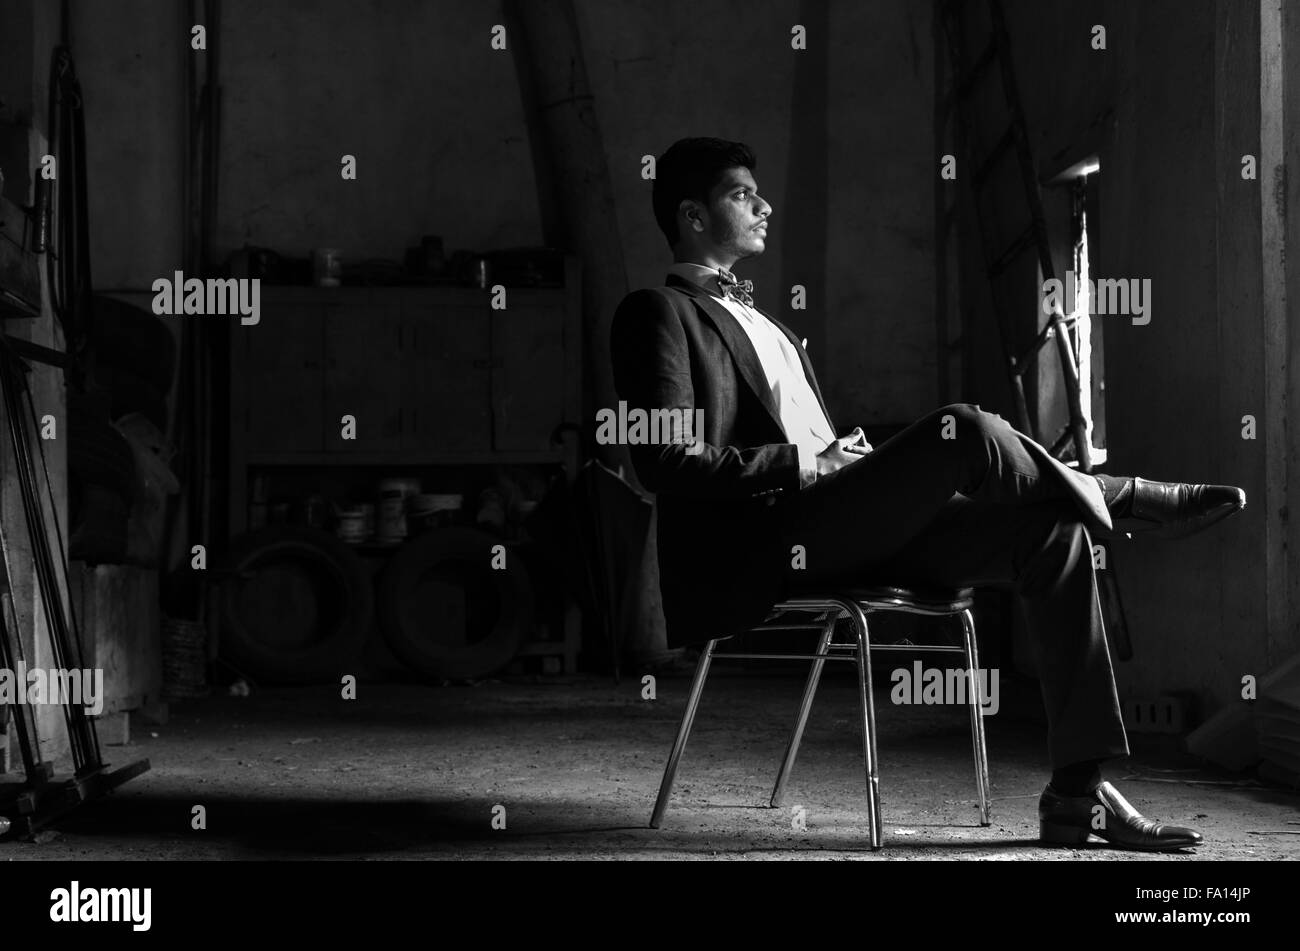 Black and White portrait of a young man dressed in black suit, sitting on a chair, in an old dark garage room. Stock Photo